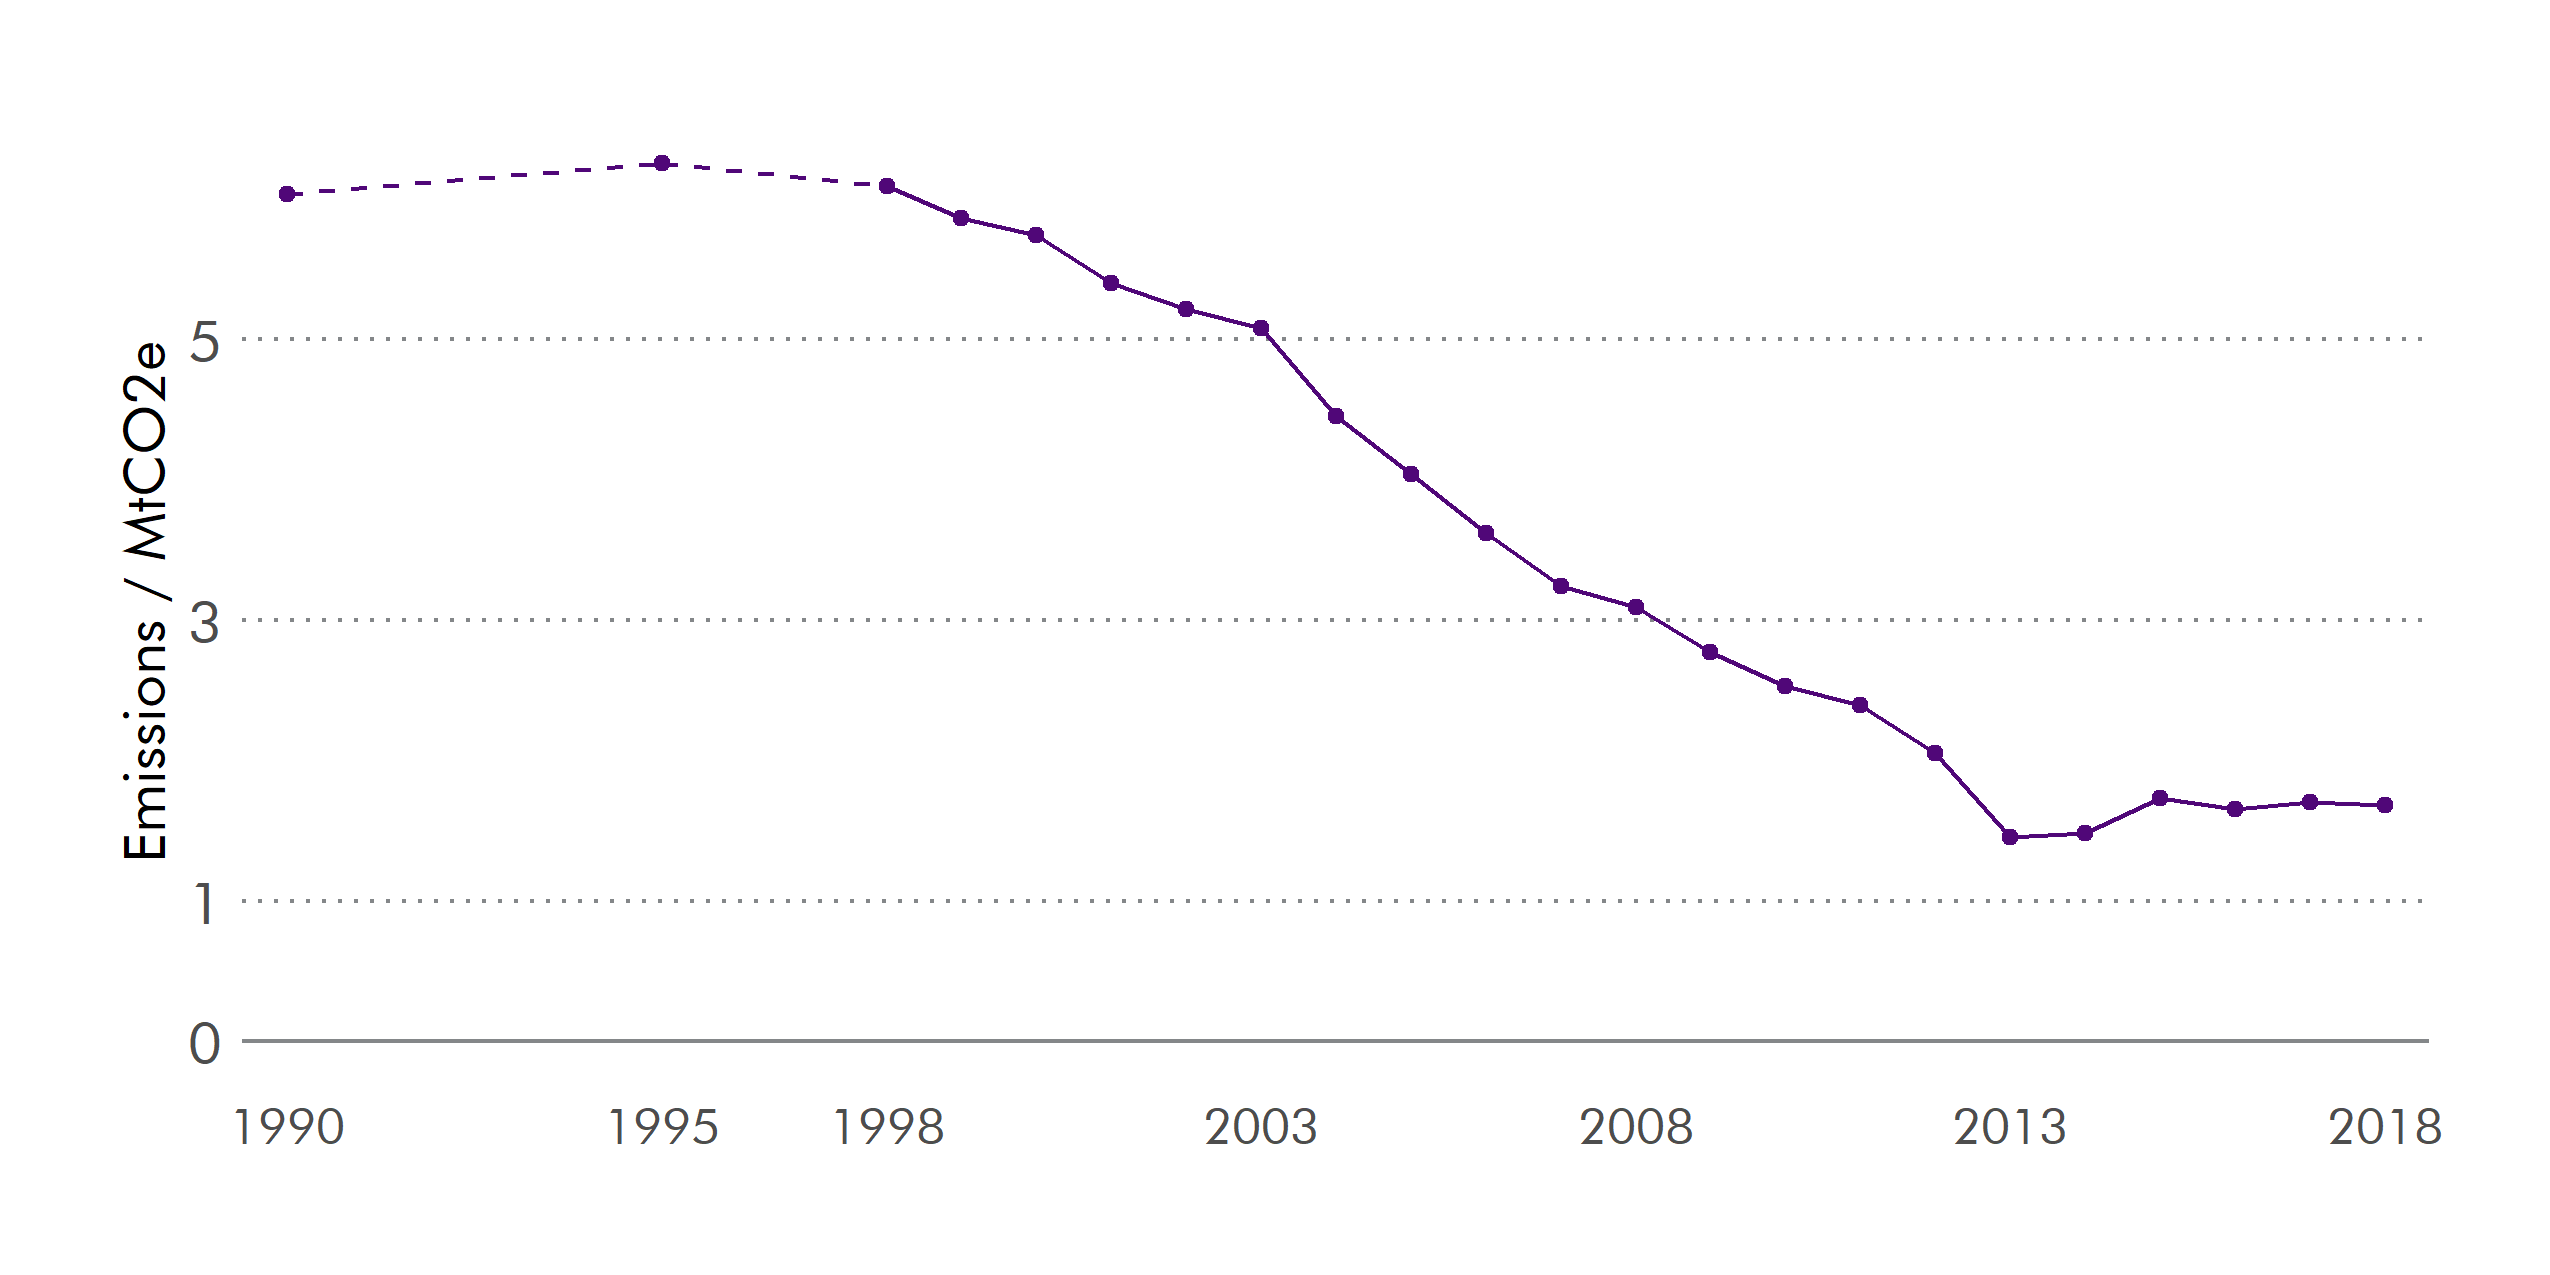 Emissions from waste have reduced significantly since 1990, but have rebounded slightly in recent years.